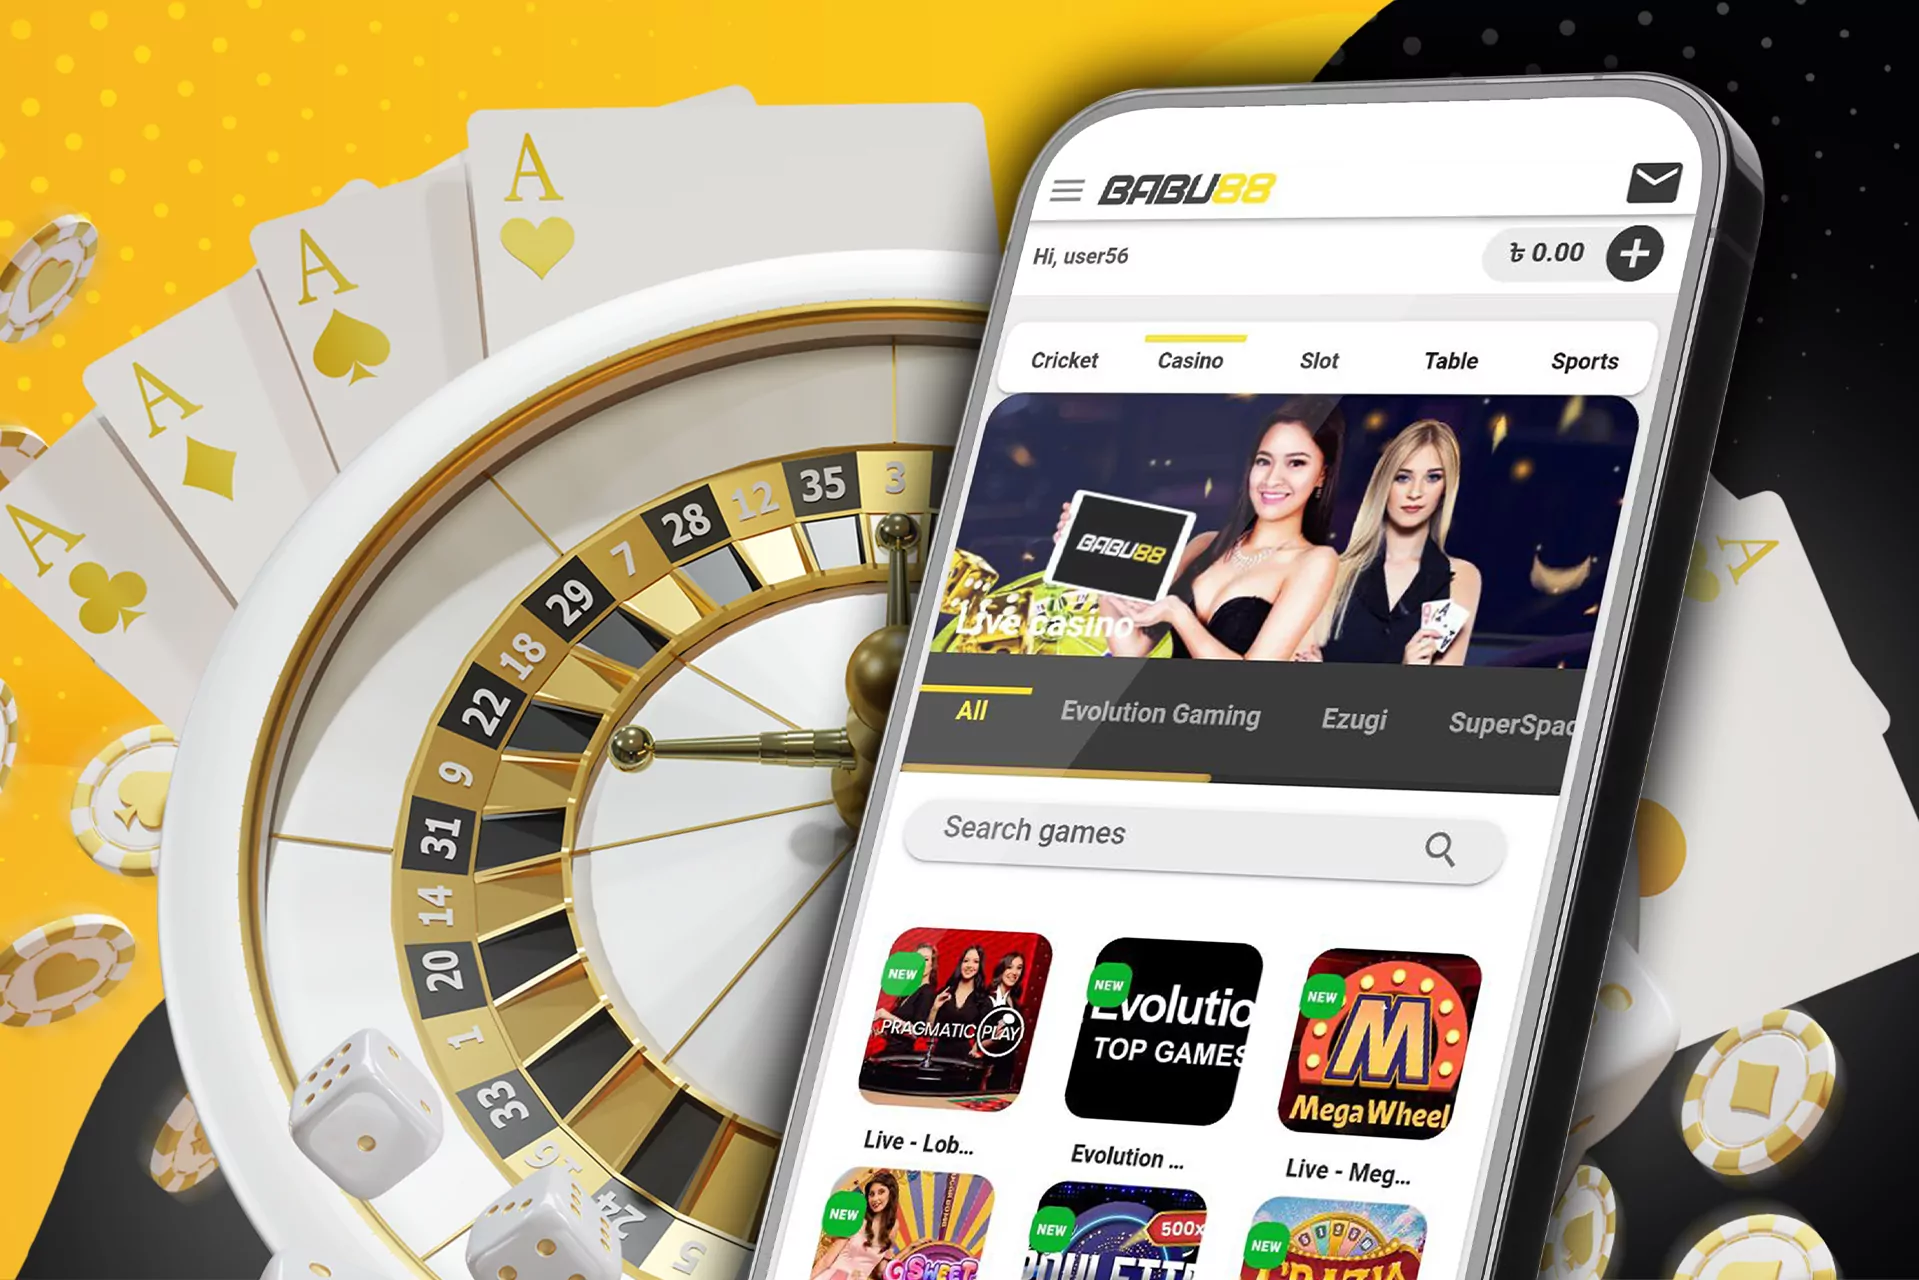 The casino section is also presented in the Babu88 app.